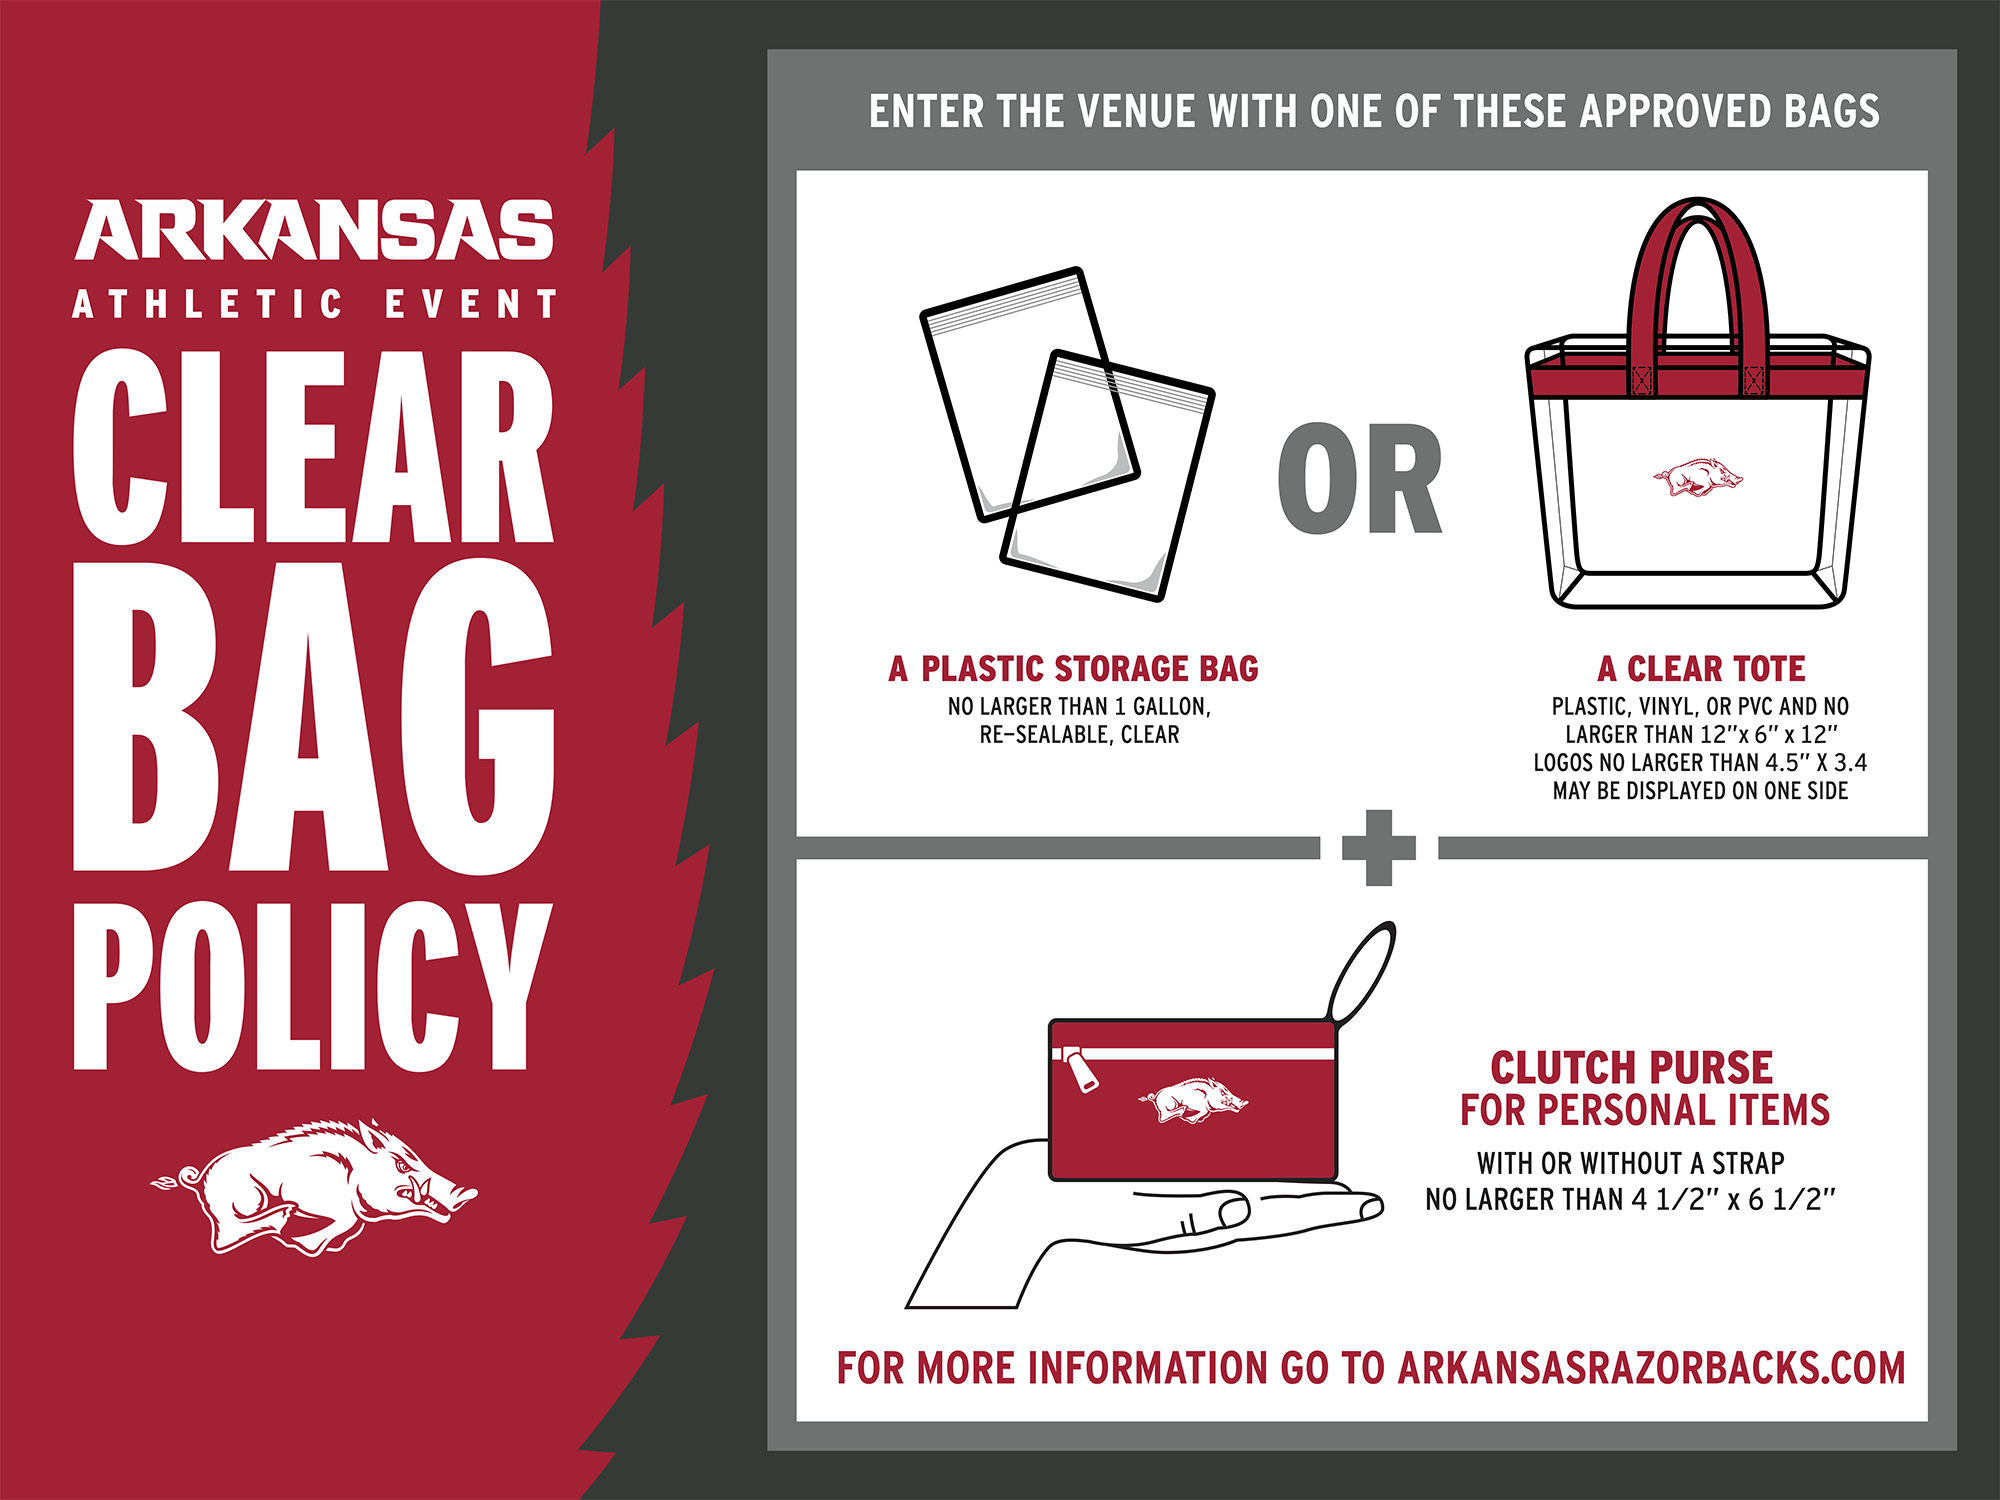 UofL Adds Clear Bag Policy, Magnetic Wanding at Football Games